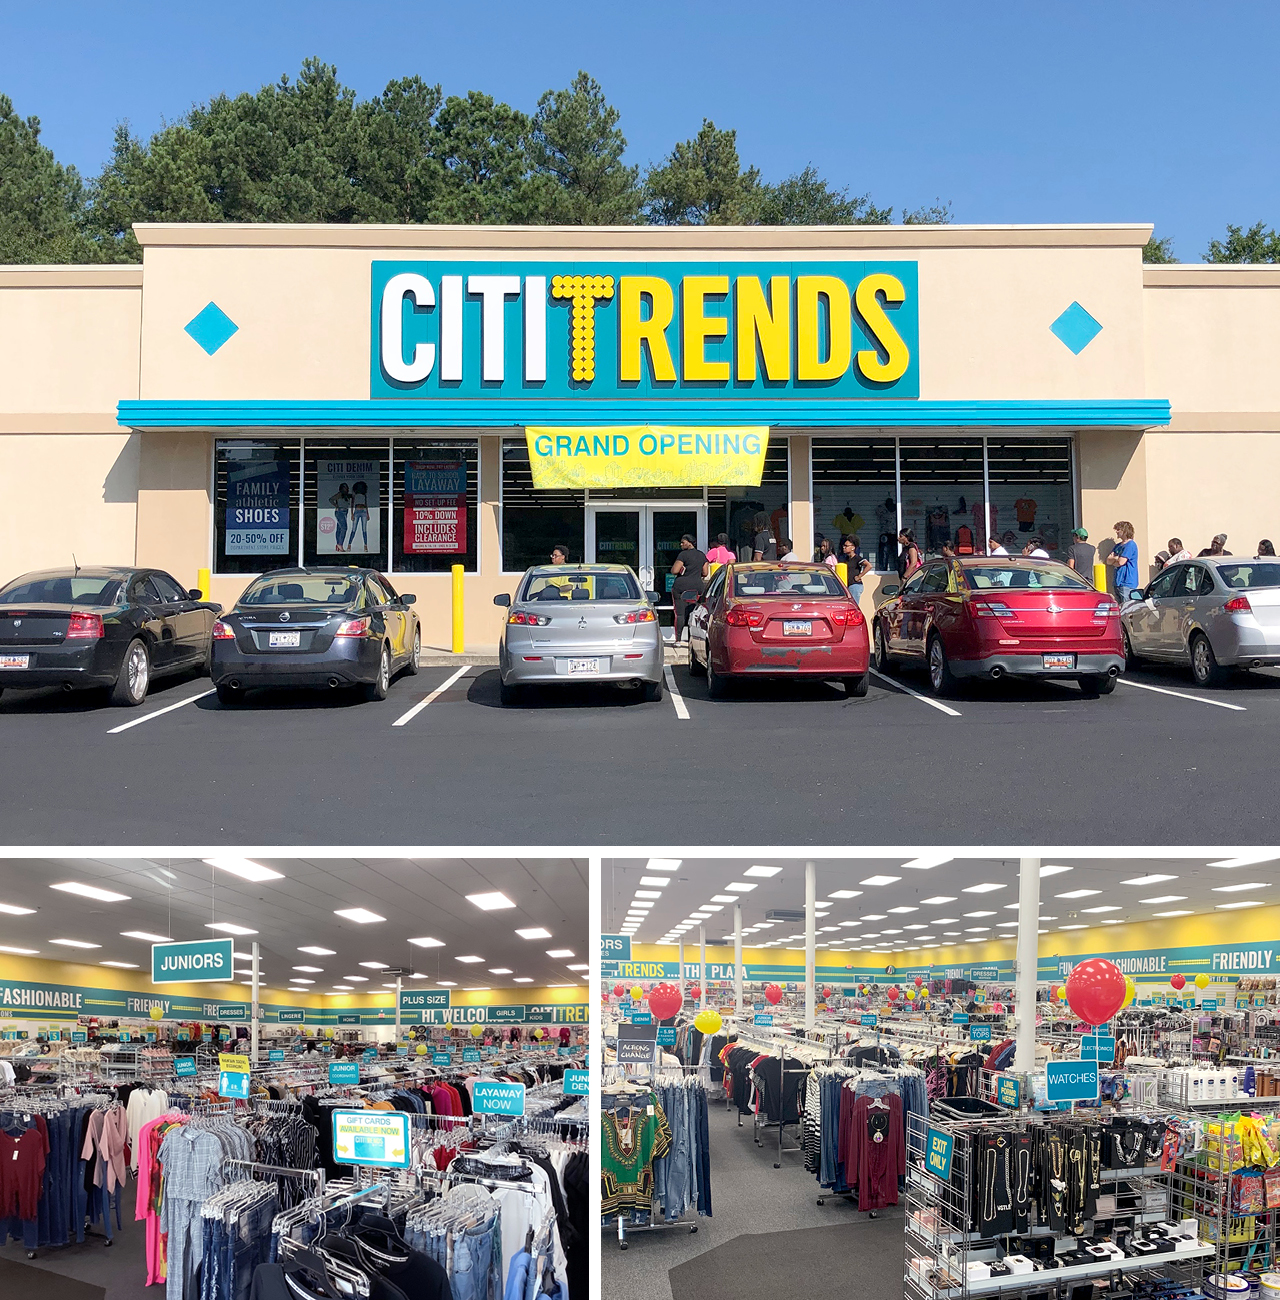 Citi Trends - Betty Boop is the name and Citi Trends has your